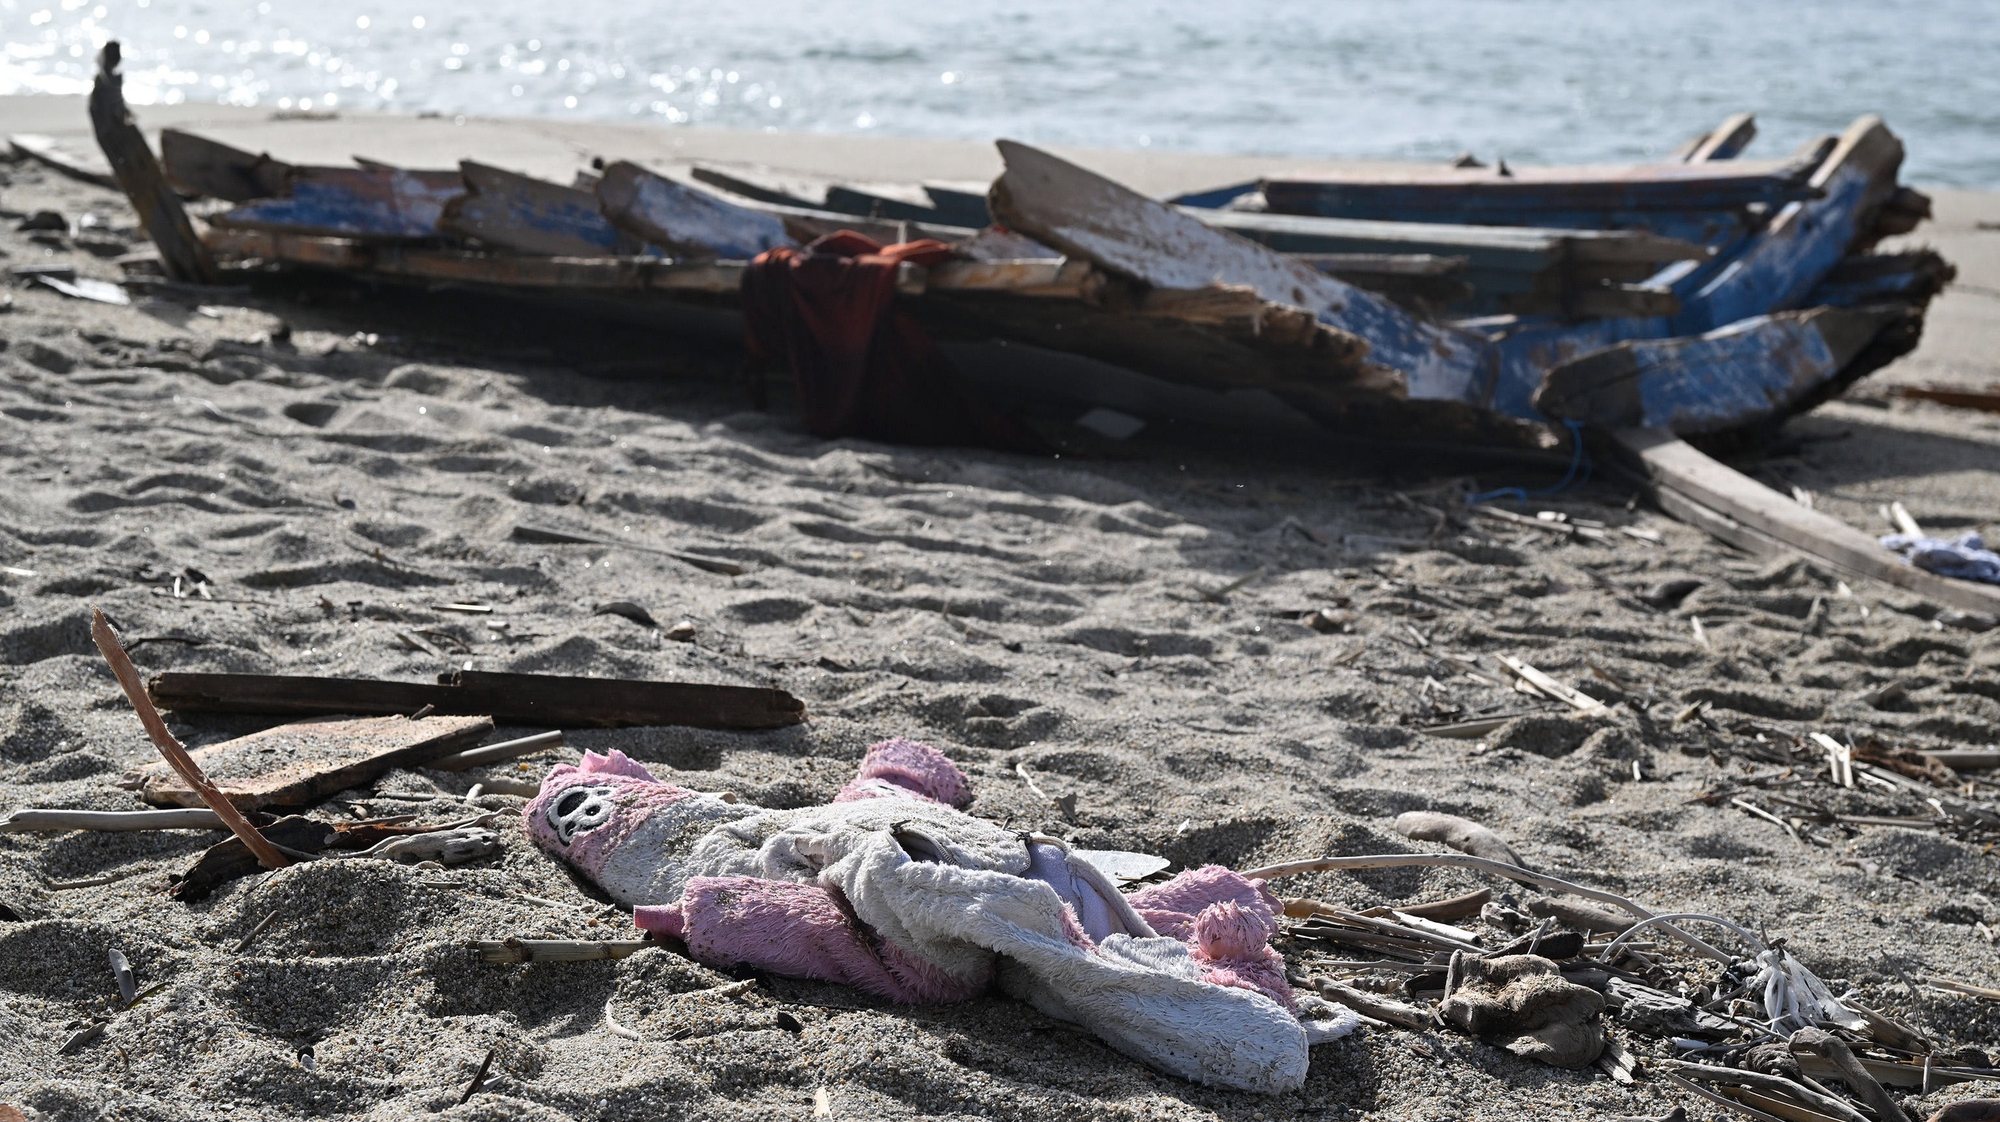 epa10496754 Pieces of wood and other debris washed up on the beach, three days after a boat of migrants sank off the coast, in Steccato di Cutro, Crotone Province, southern Italy, 01 March 2023. The death toll from a shipwreck off Calabria&#039;s coast in southern Italy rose to 67 on 01 March 2023, while three men were in detention accused of human trafficking, Italian officials said. A boat carrying migrants sank in rough seas near the Calabrian coast on 26 February.  EPA/CARMELO IMBESI